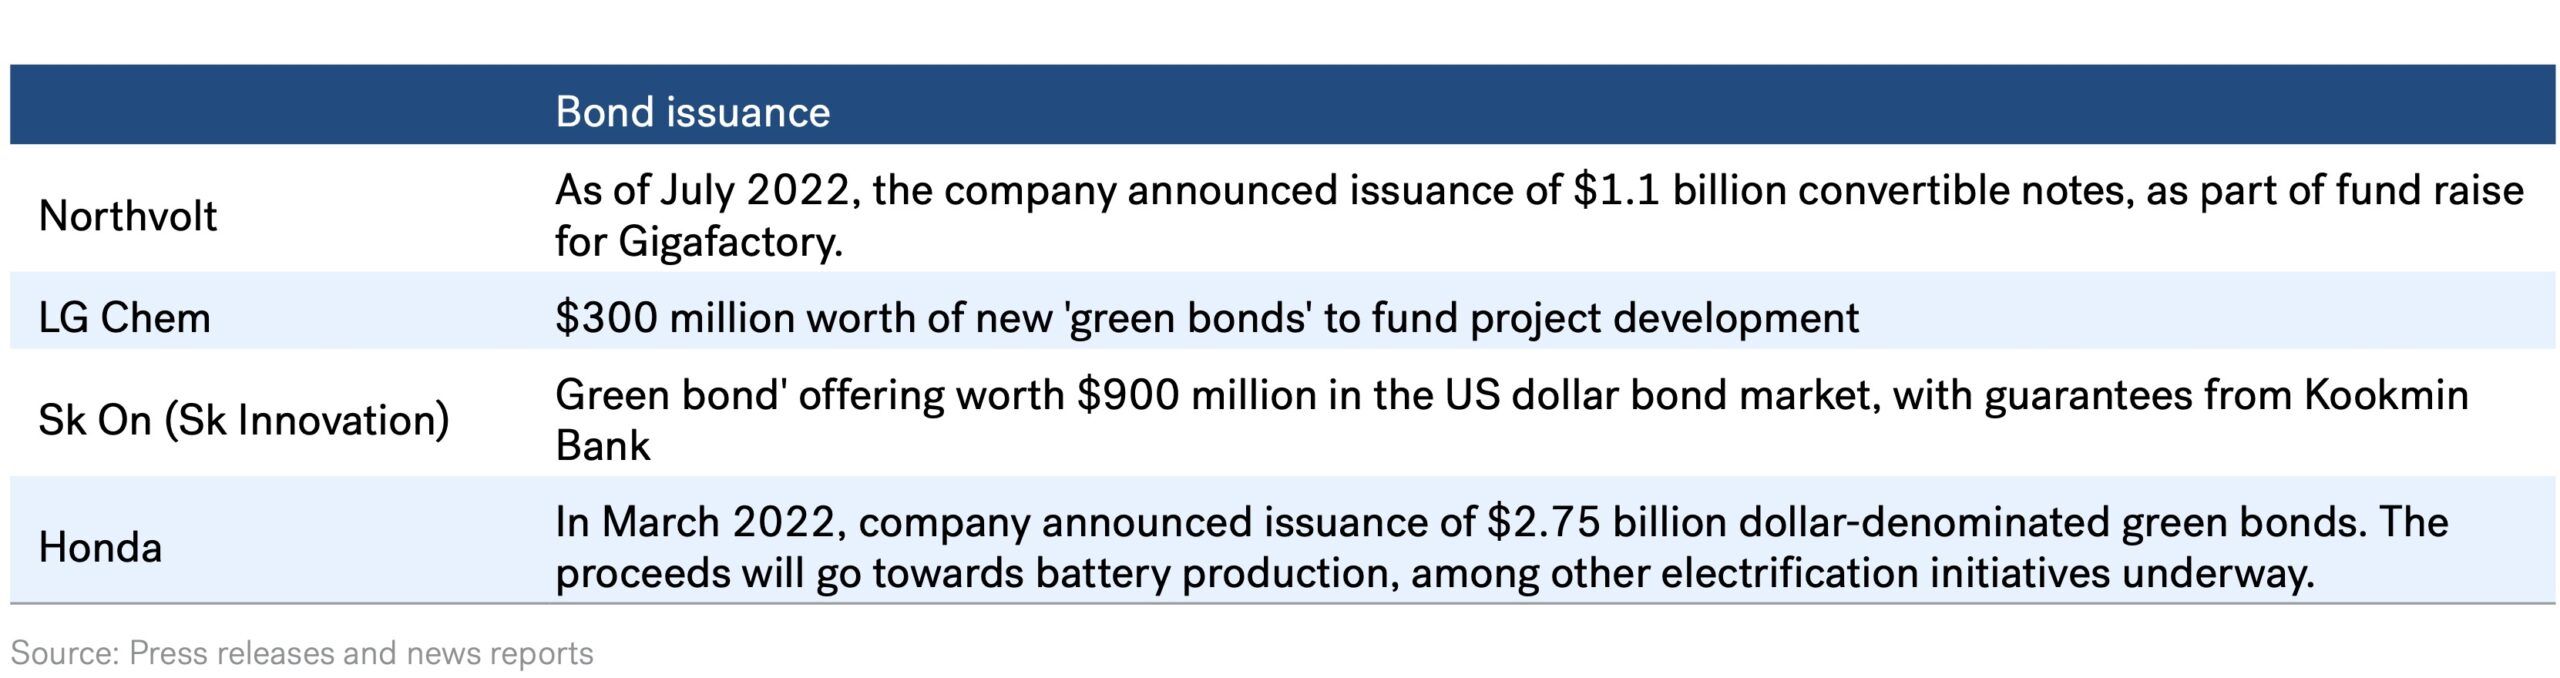 Gigafactory - Bond Issuance by Major Companies to Fund Battery Manufacturing Projects